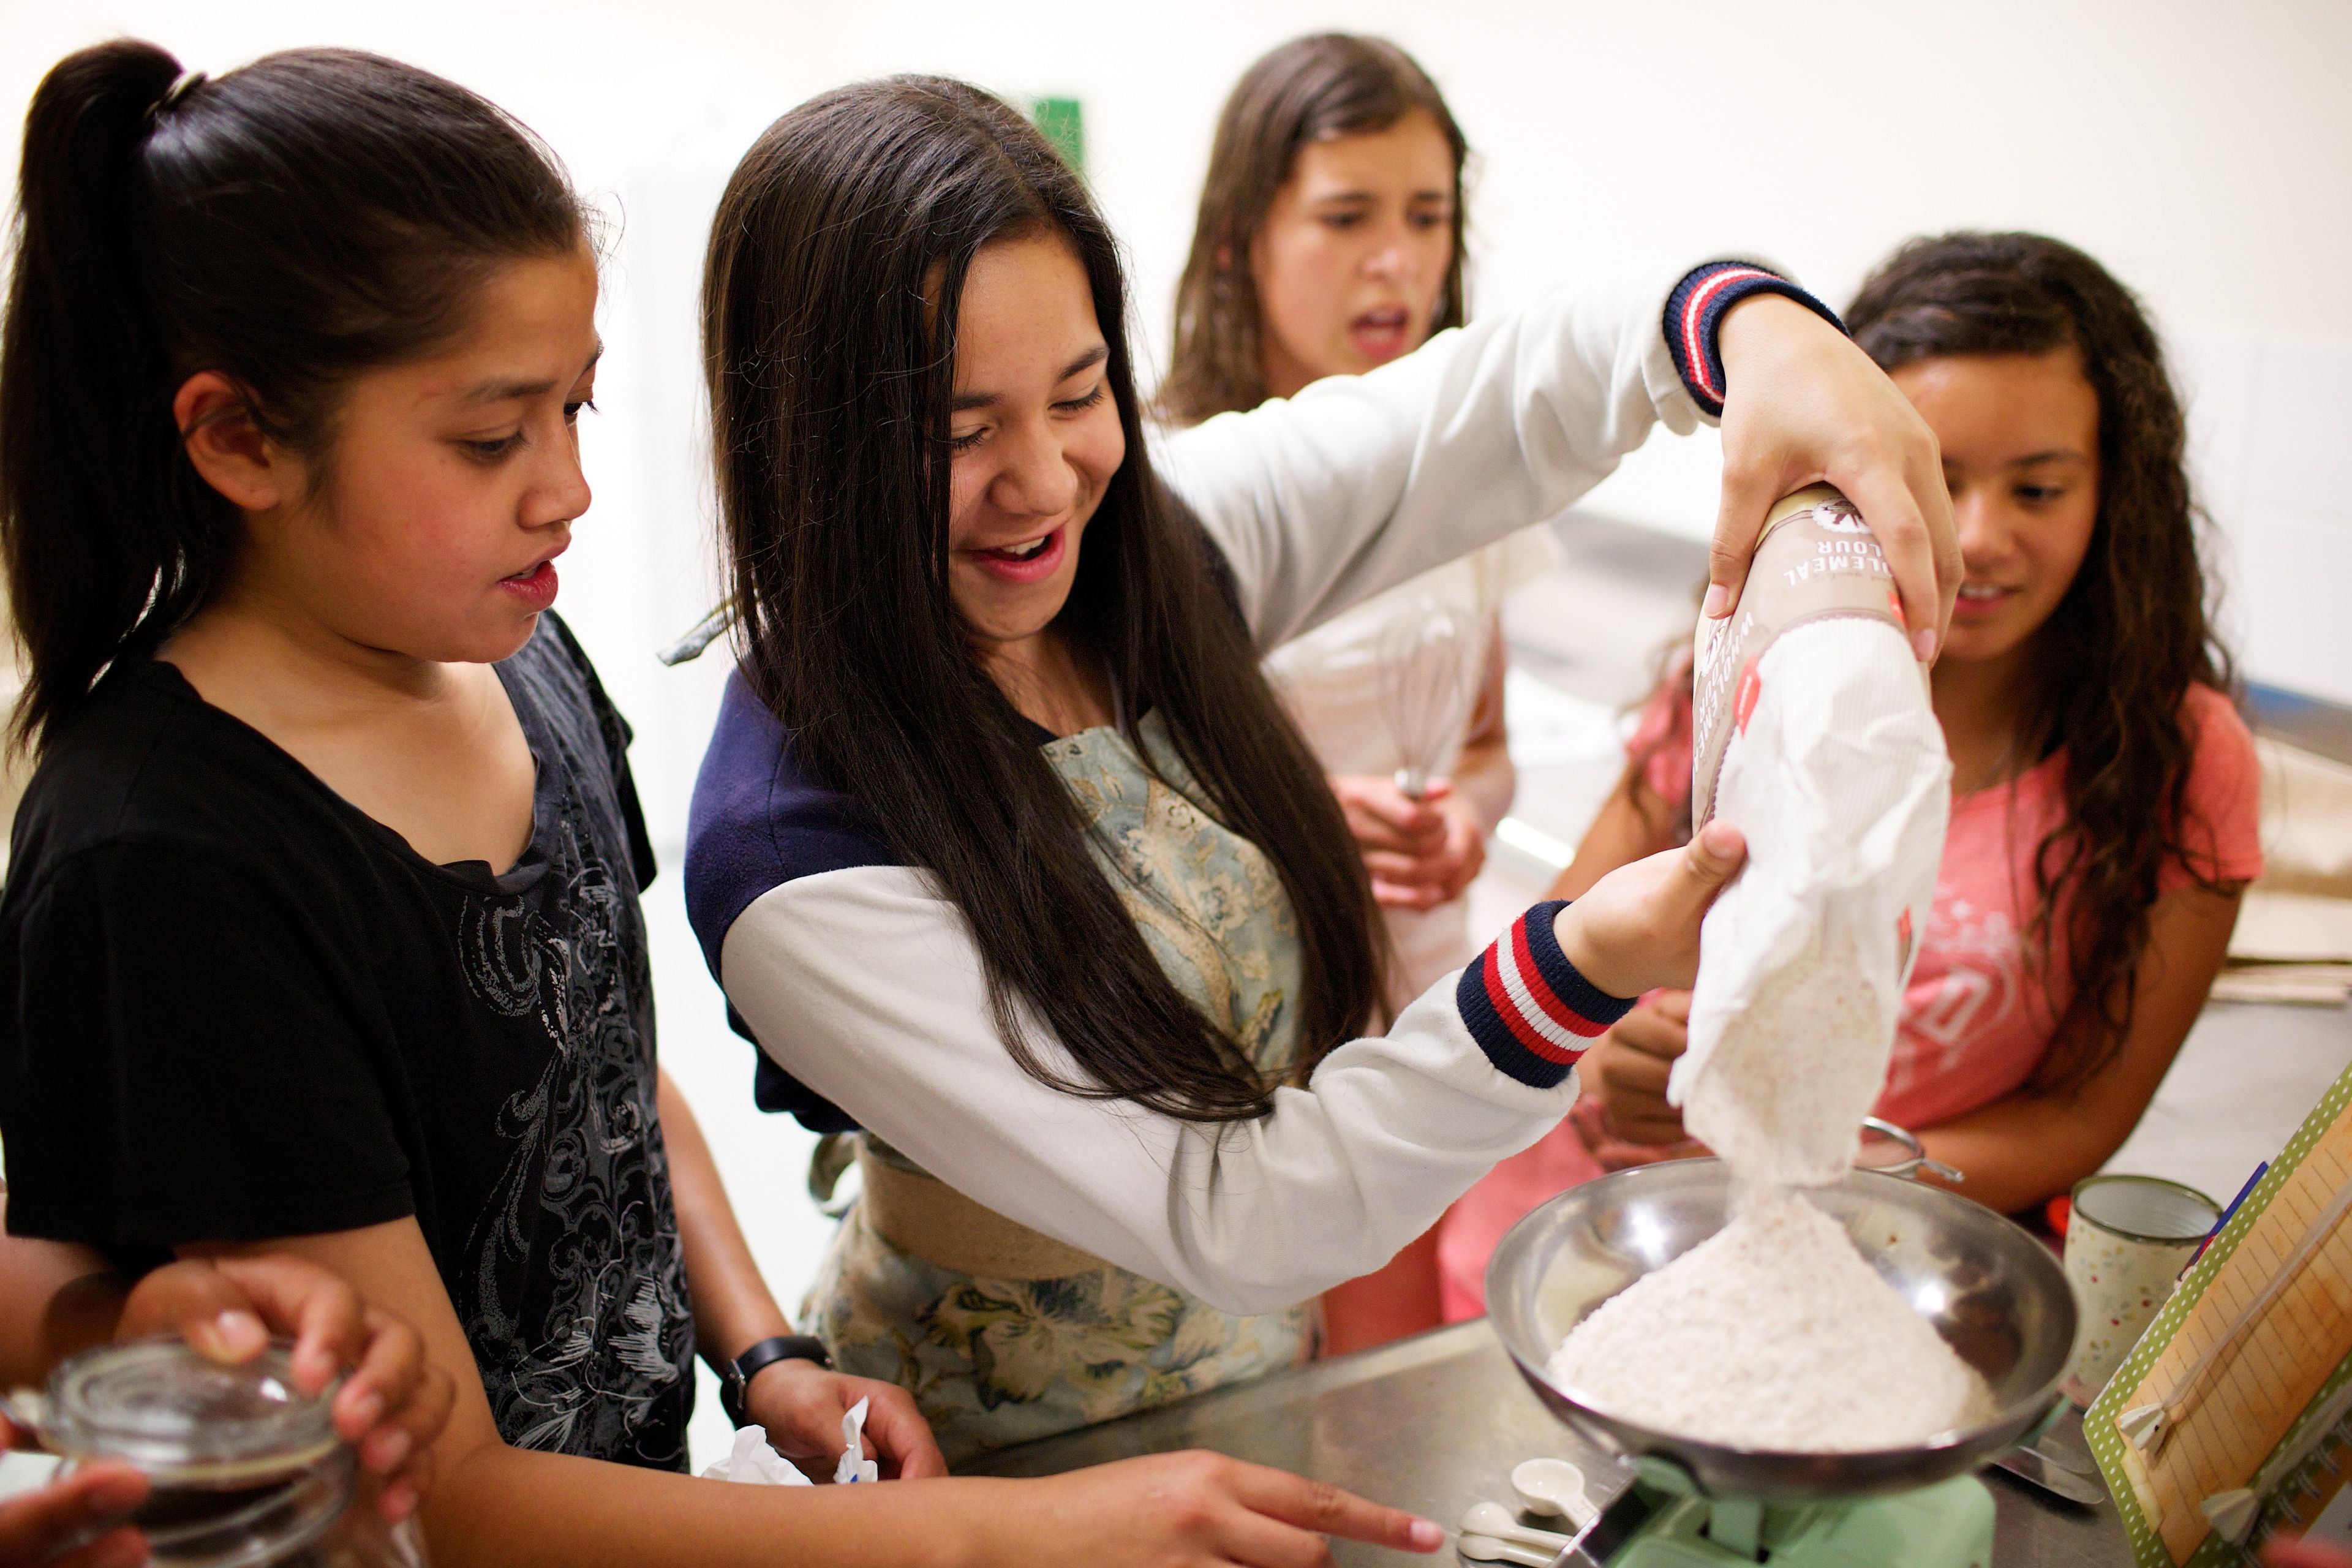 A young woman pours flour into a bowl as she and three other young women bake together.